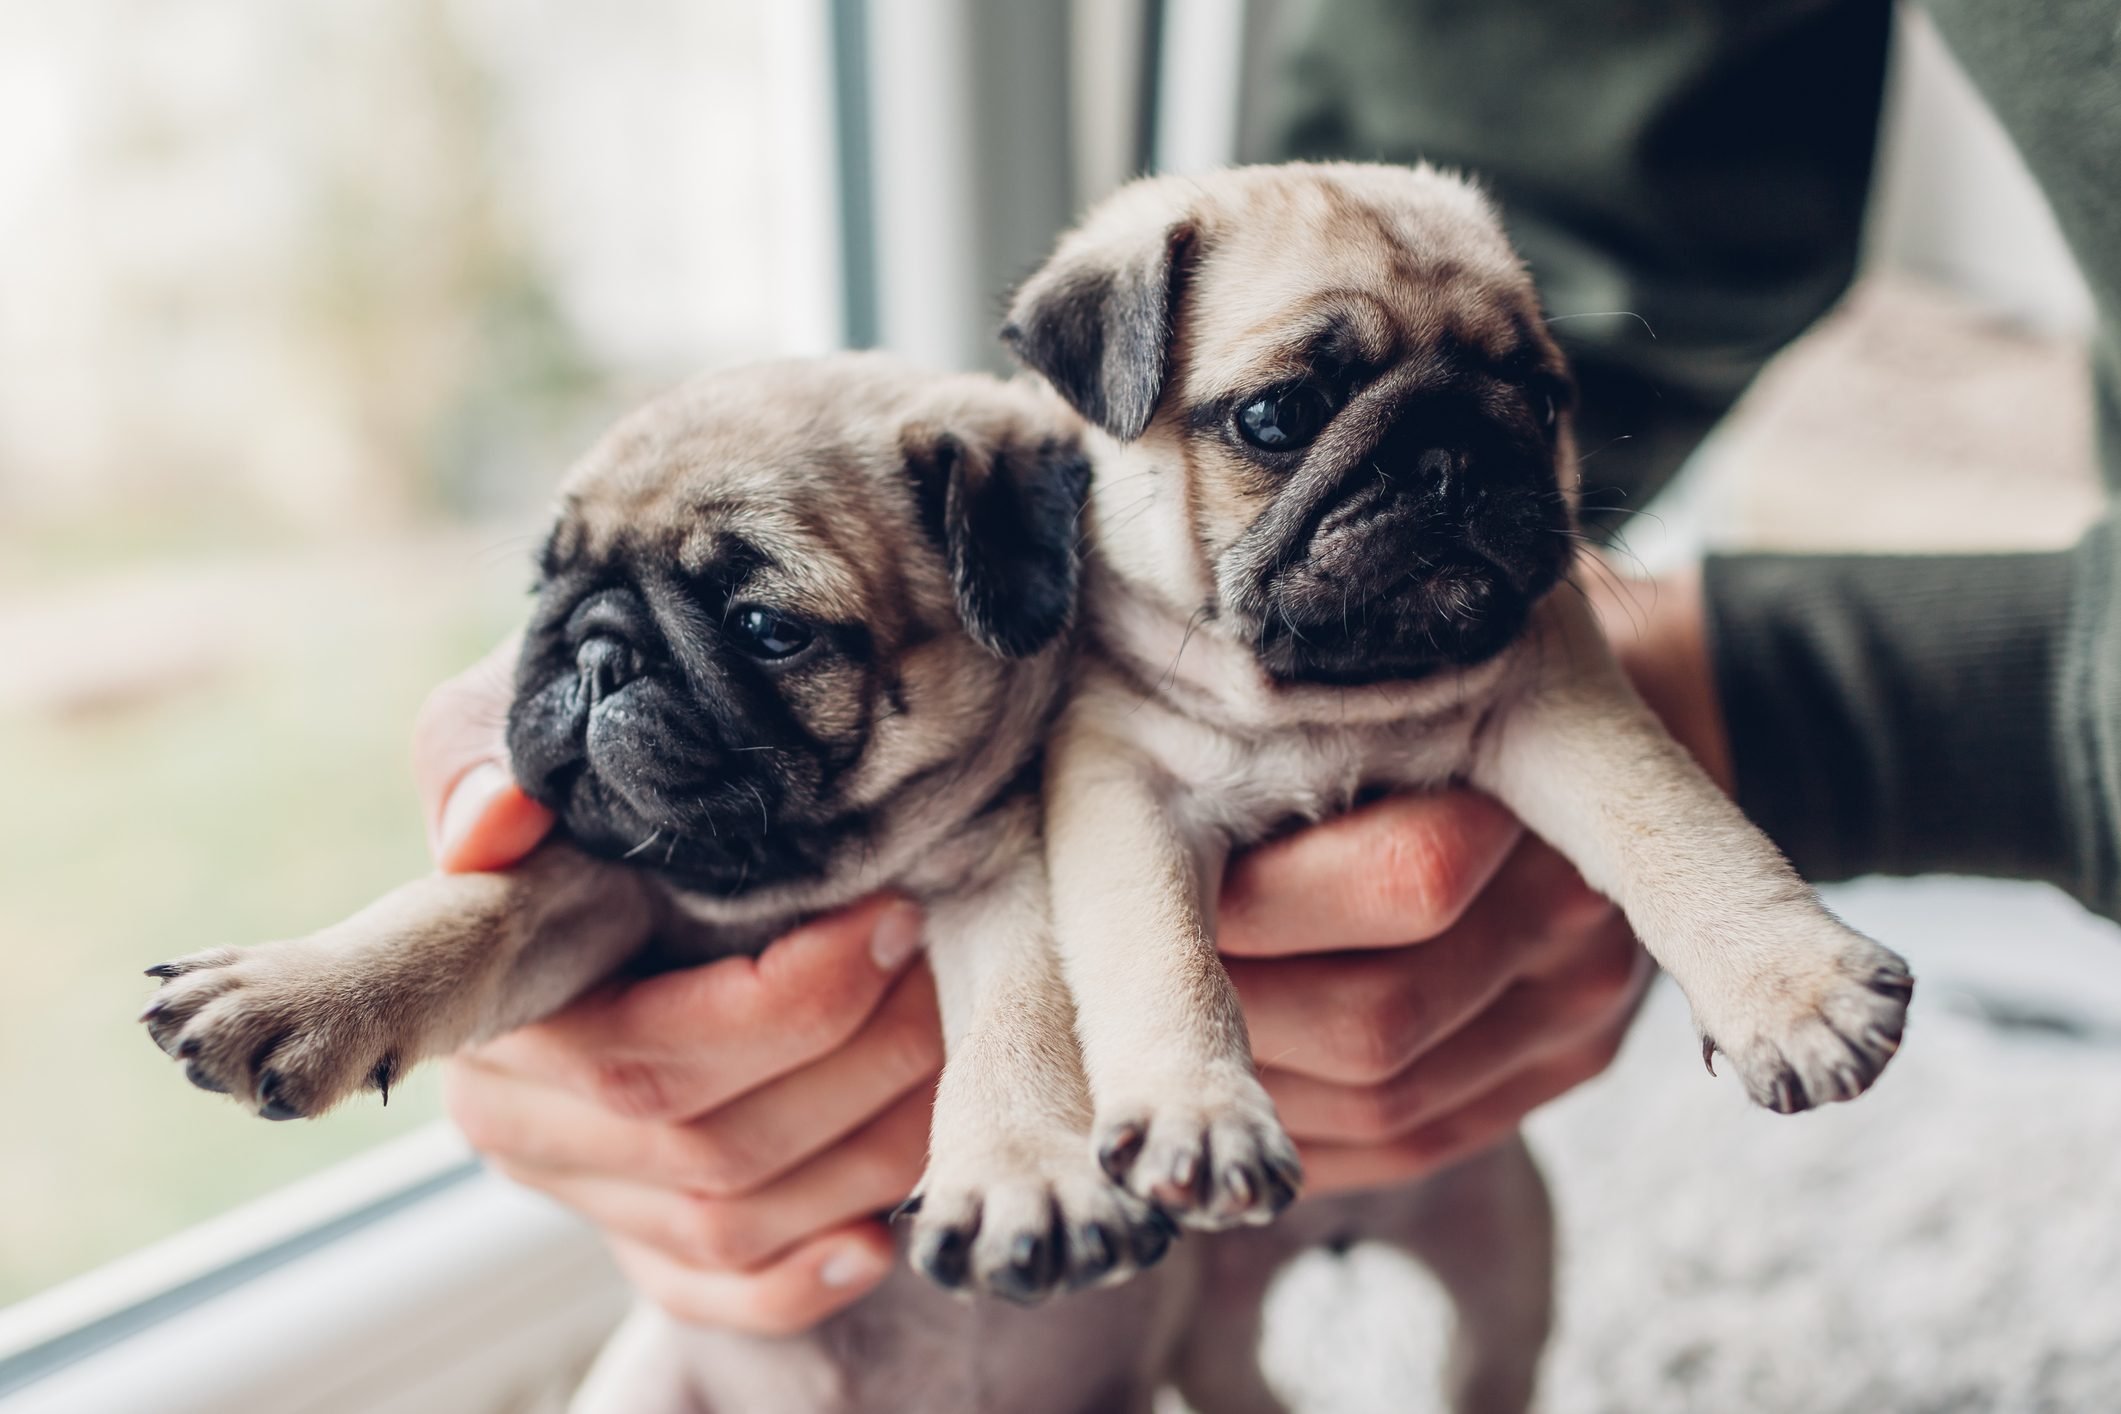 30 Cute Pug Pictures That Will Make You Want One | Reader’s Digest